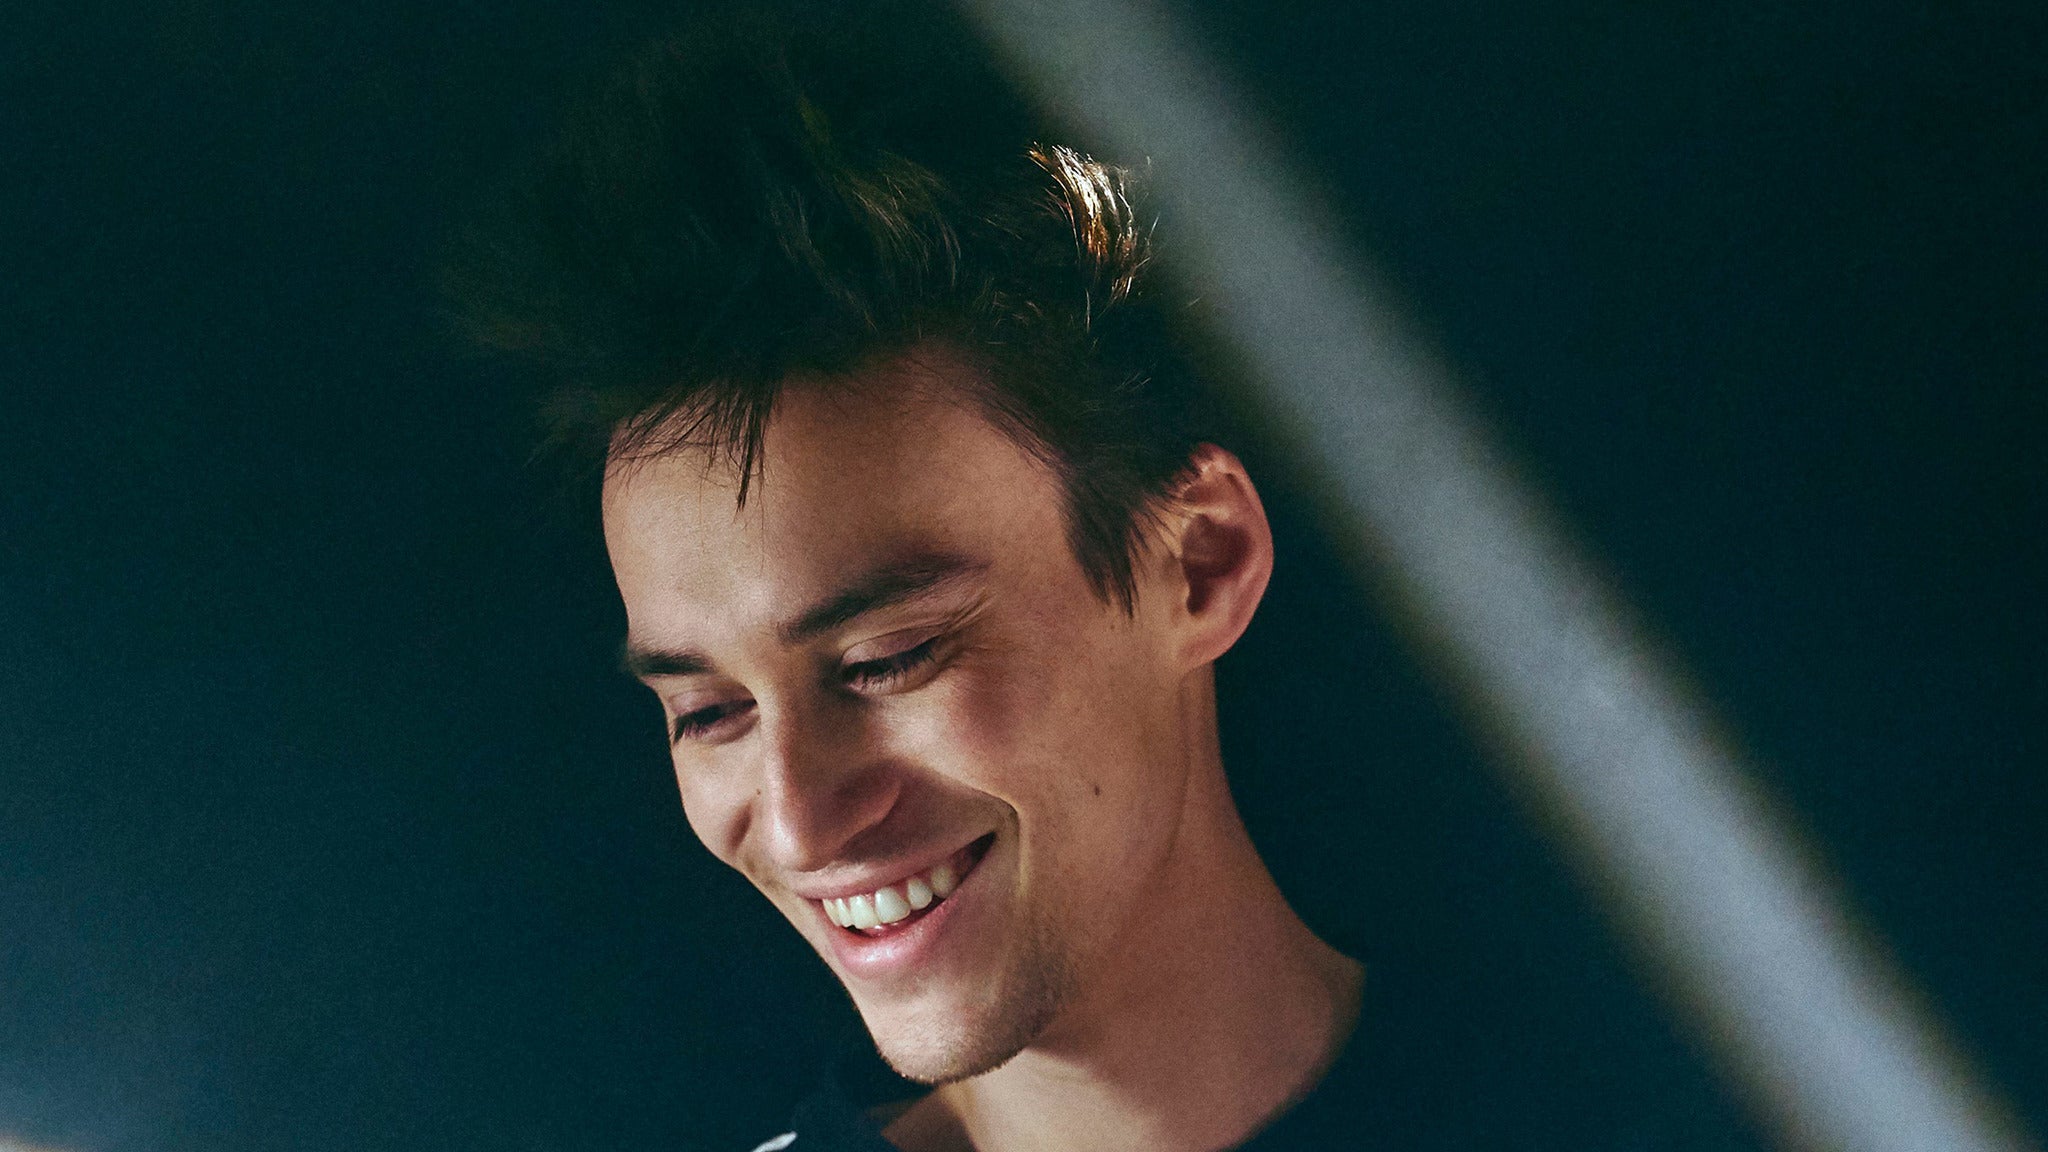 Jacob Collier - DJESSE World Tour Spring 2022 in Orlando promo photo for Live Nation presale offer code